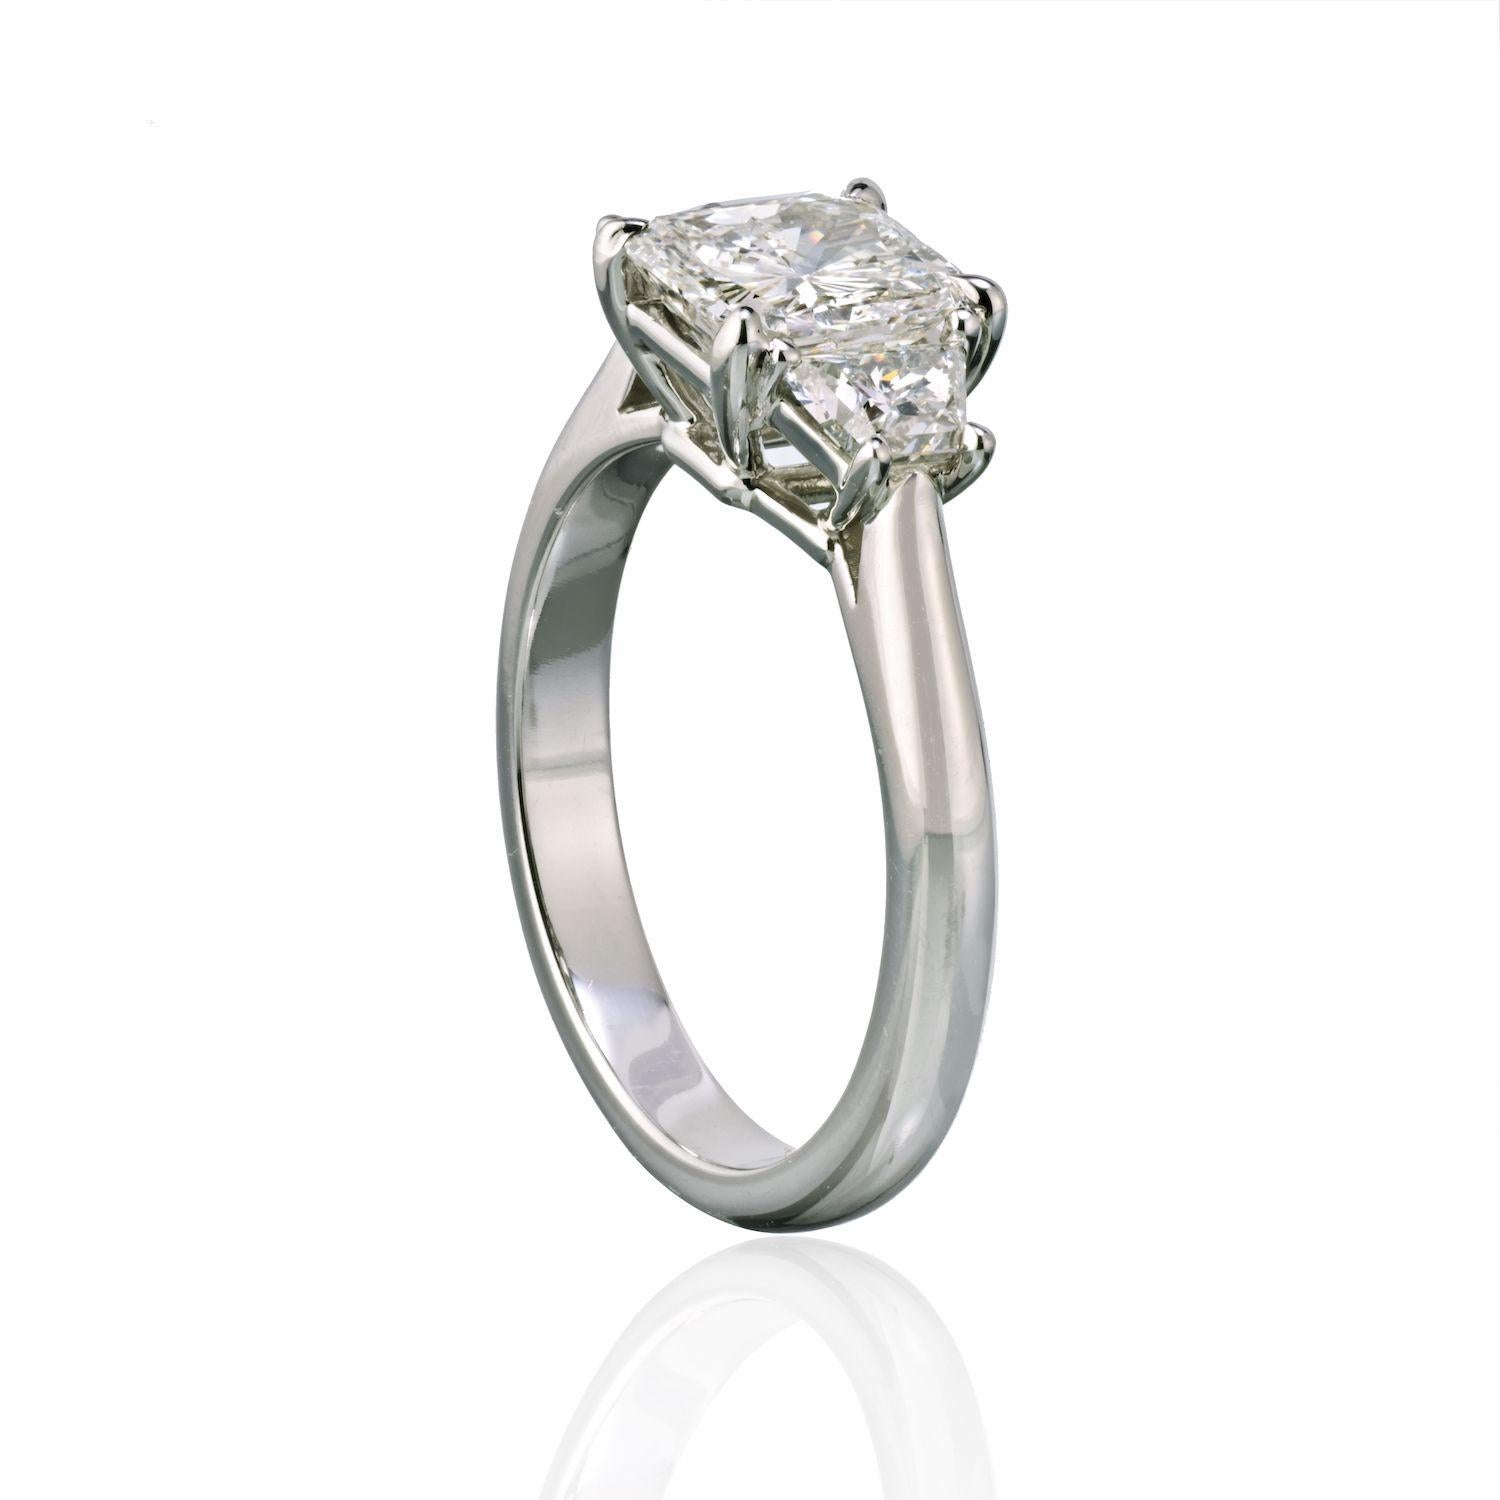 This stunning three stone Radiant Cut Diamond Engagement Ring features a 1.50 carat center diamond and is flanked by two trapezoid cut diamonds of 0.65cttw. It's an exquisite take on a classic design.
Center diamond is an H color and SI2 clarity by